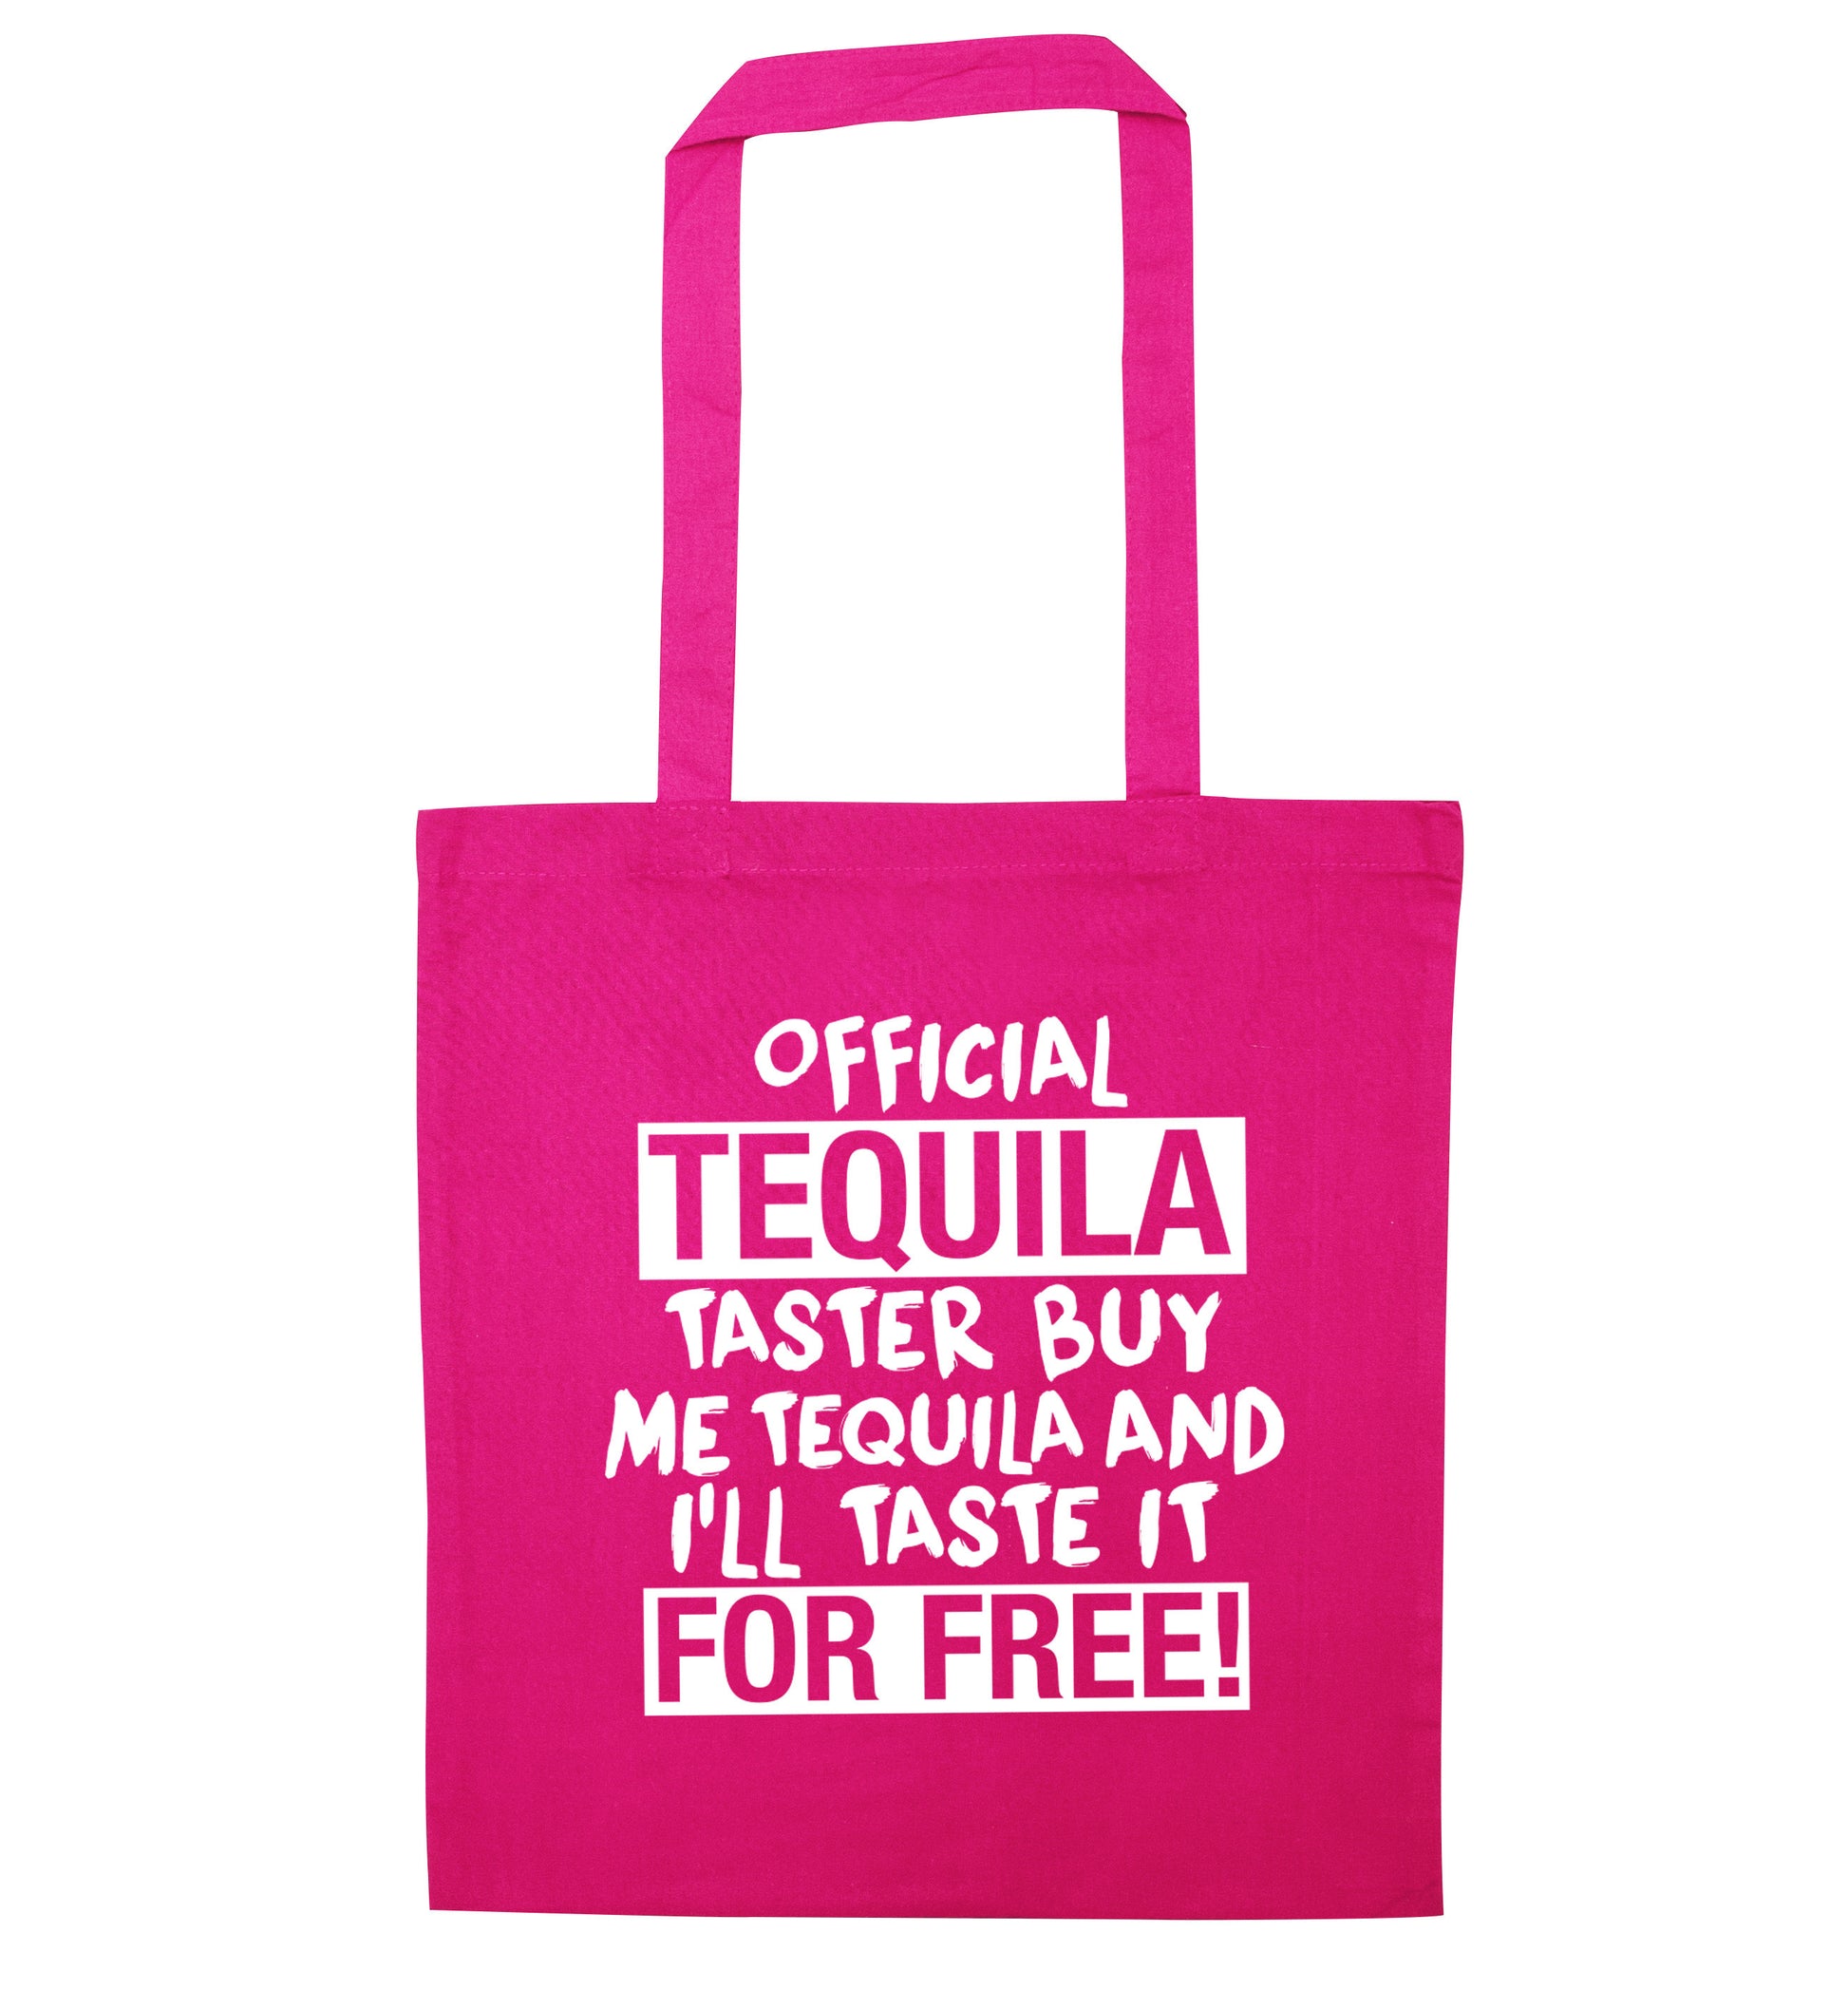 Official tequila taster buy me tequila and I'll taste it for free pink tote bag